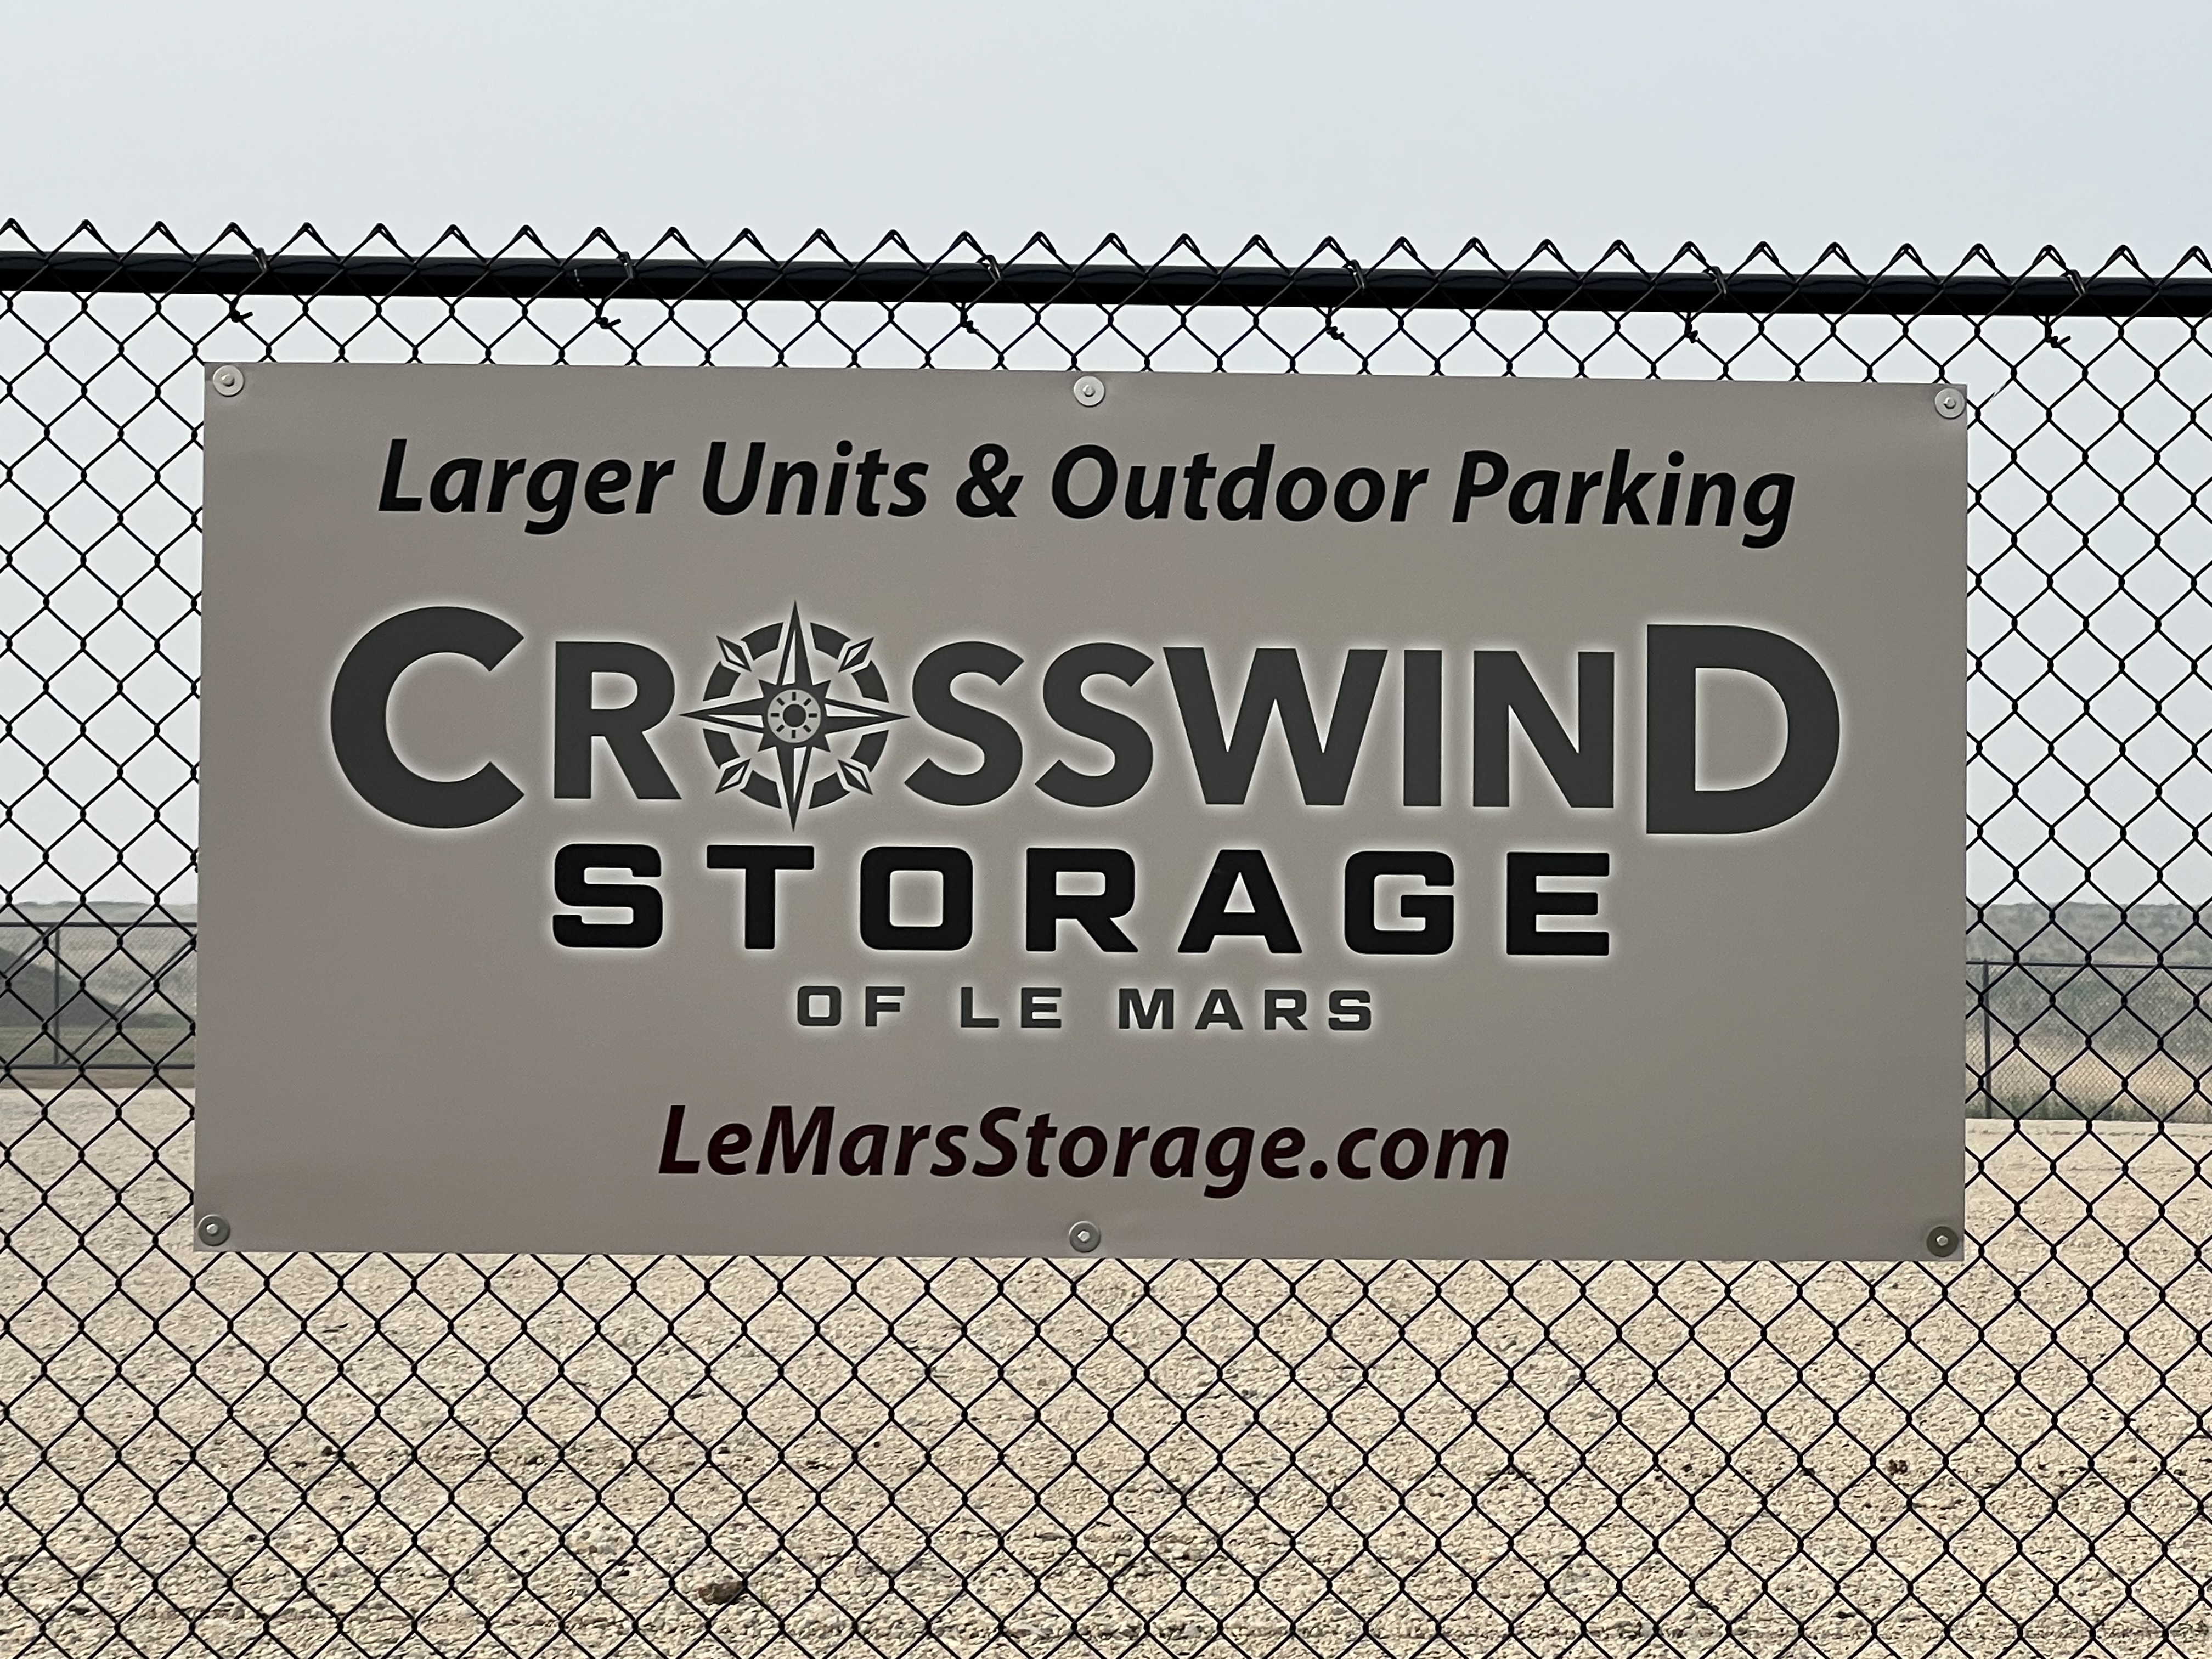 Larger Units & Outdoor Parking Options